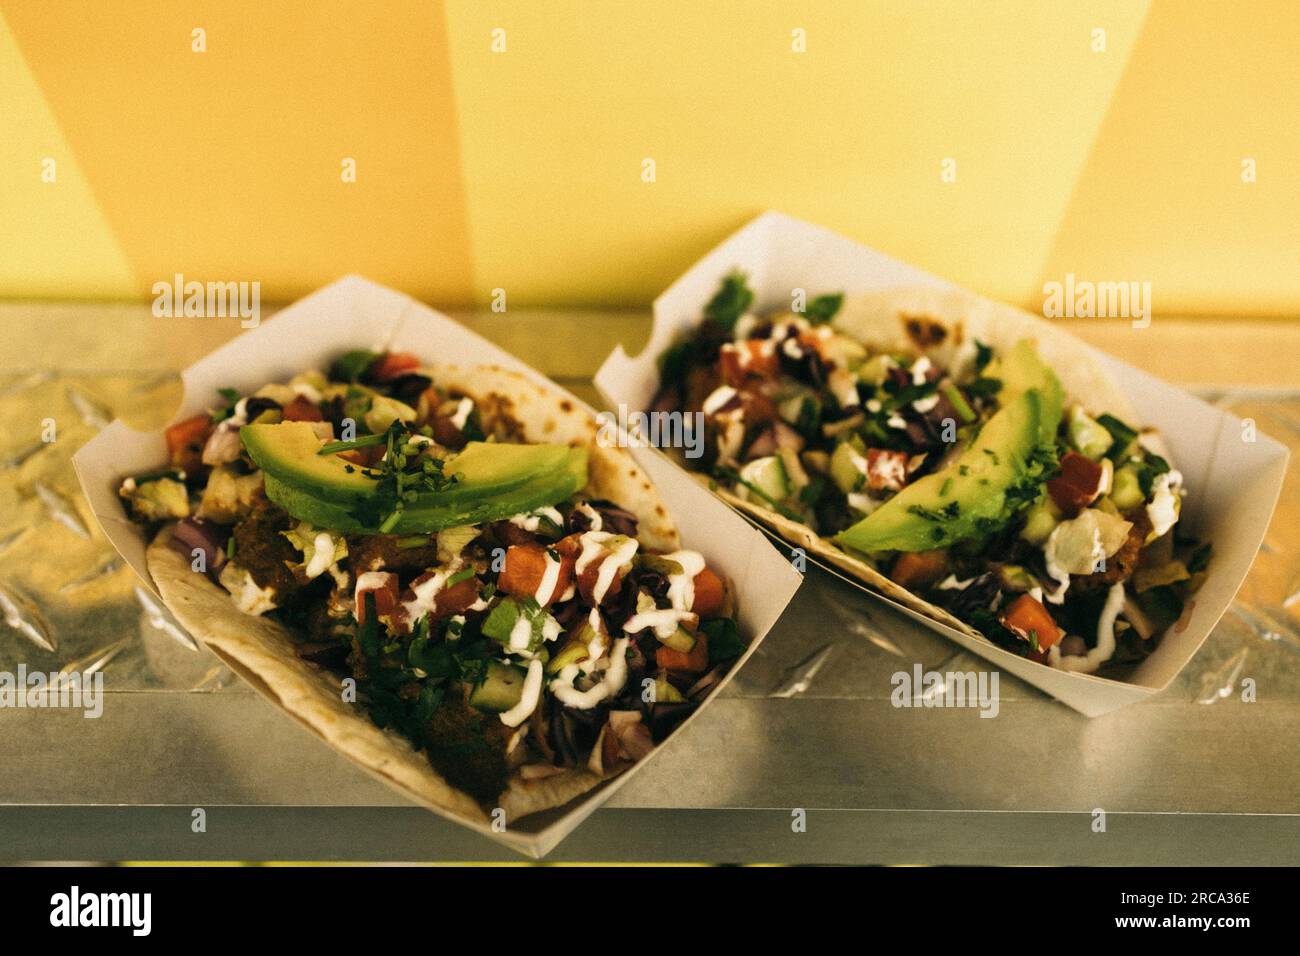 Pair of fresh tacos in take away boxes on concession stand Stock Photo